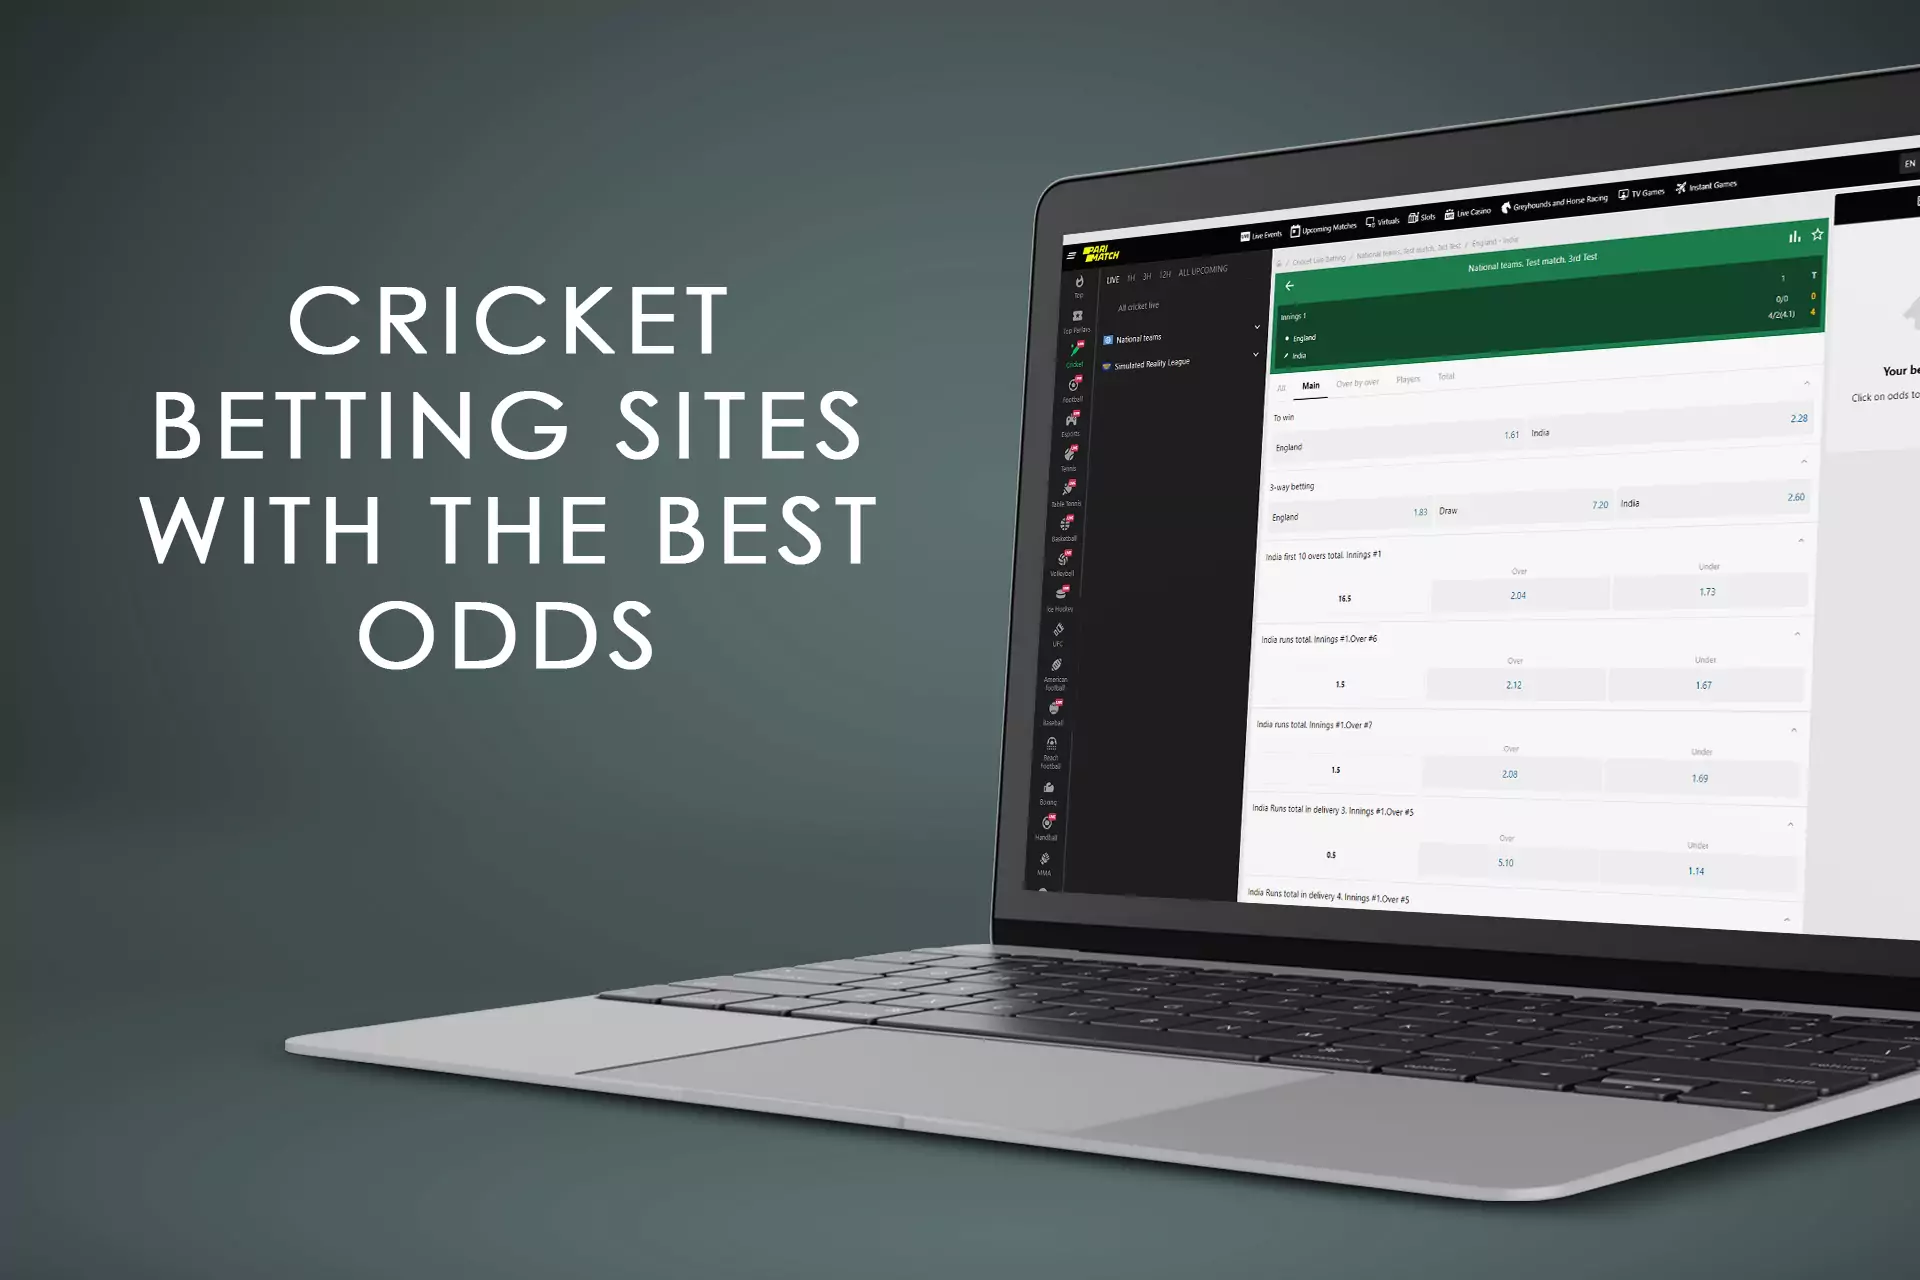 Explore our ranking of cricket betting sites with the best odds.